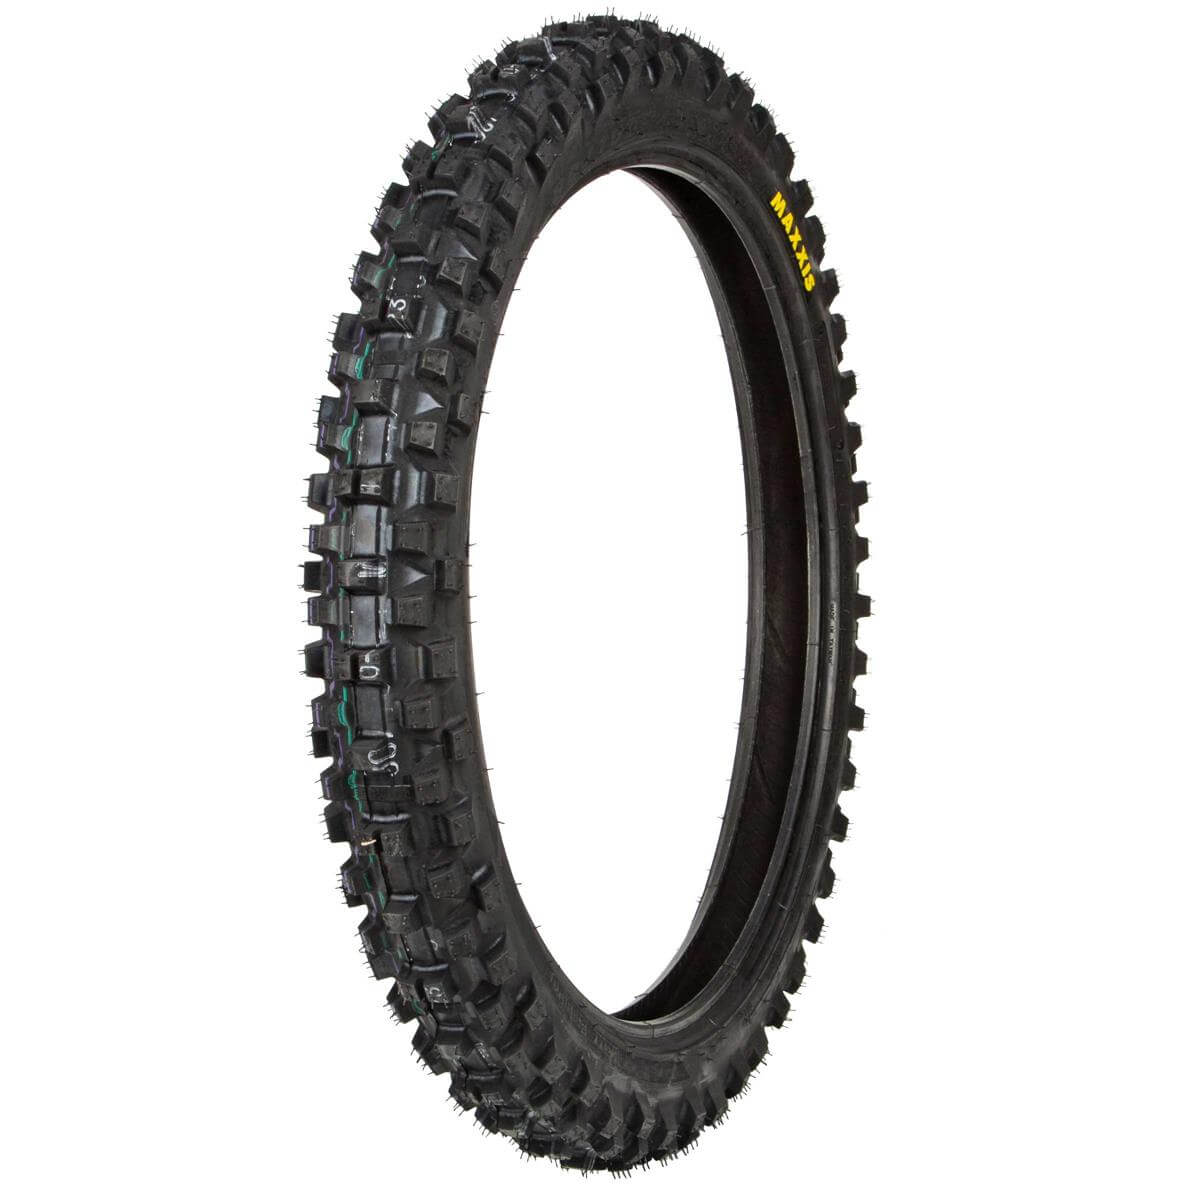 EAN 6933882559998, MAXXIS C-6531 FRONT, 110/70 R14 50 P